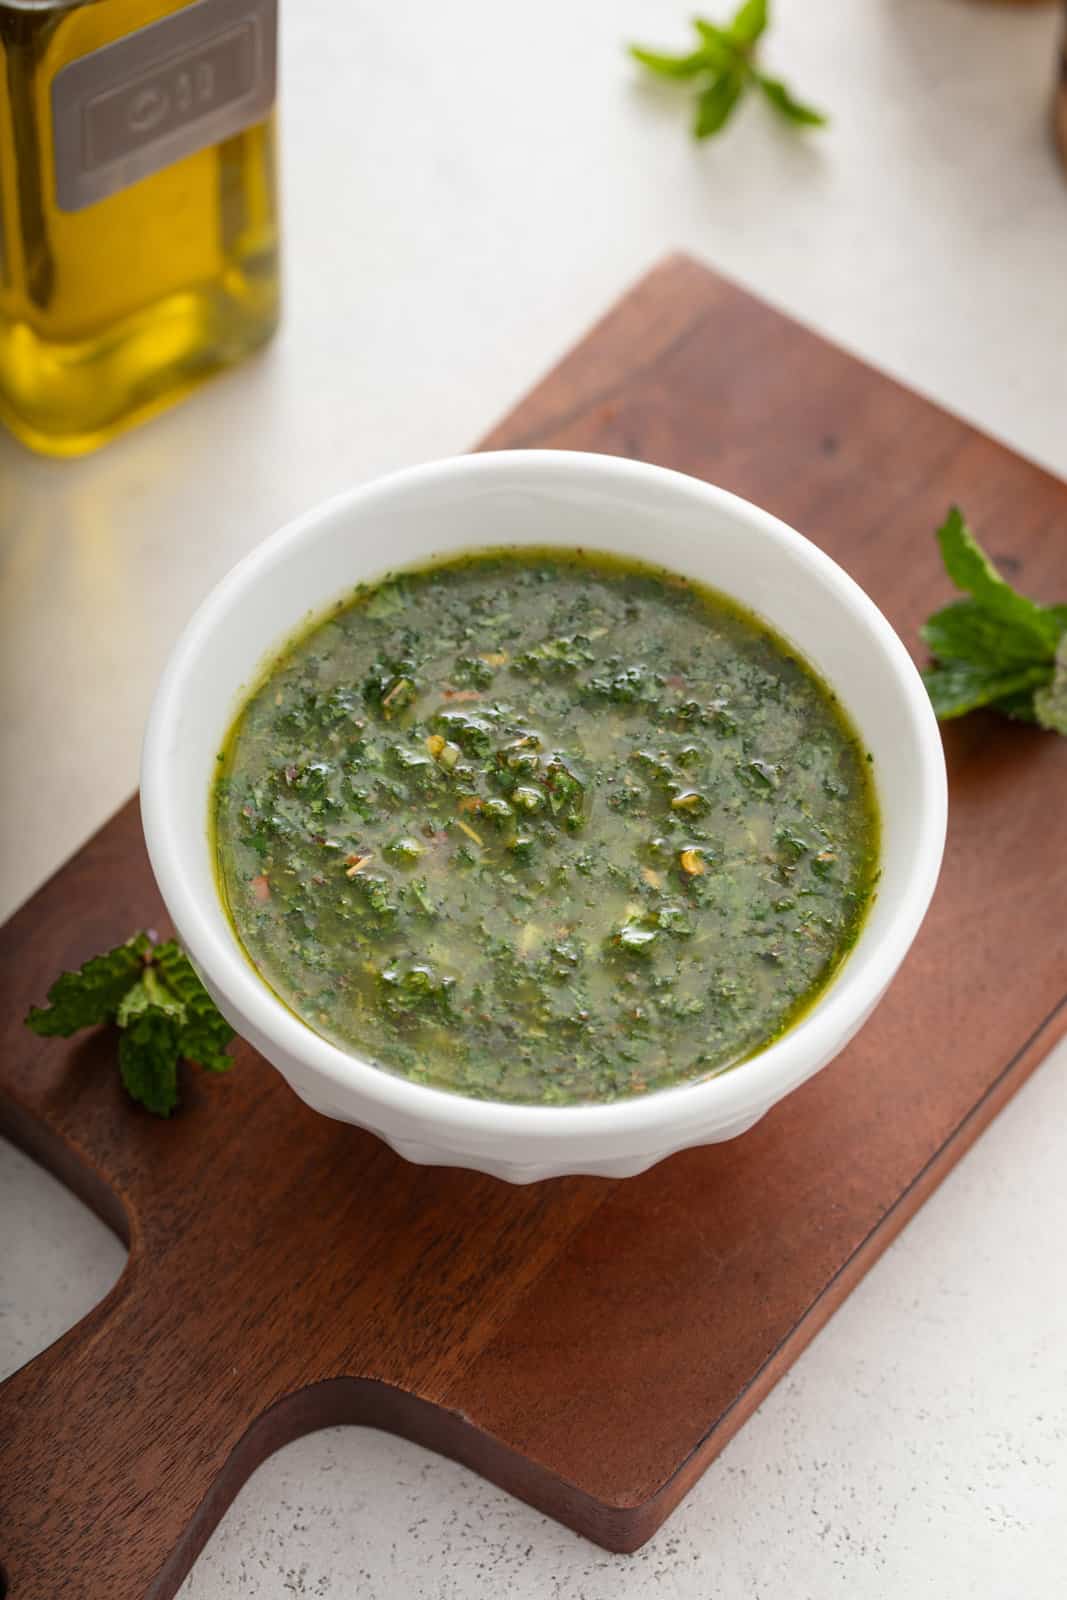 Mint chimichurri in a white bowl set on a wooden board.